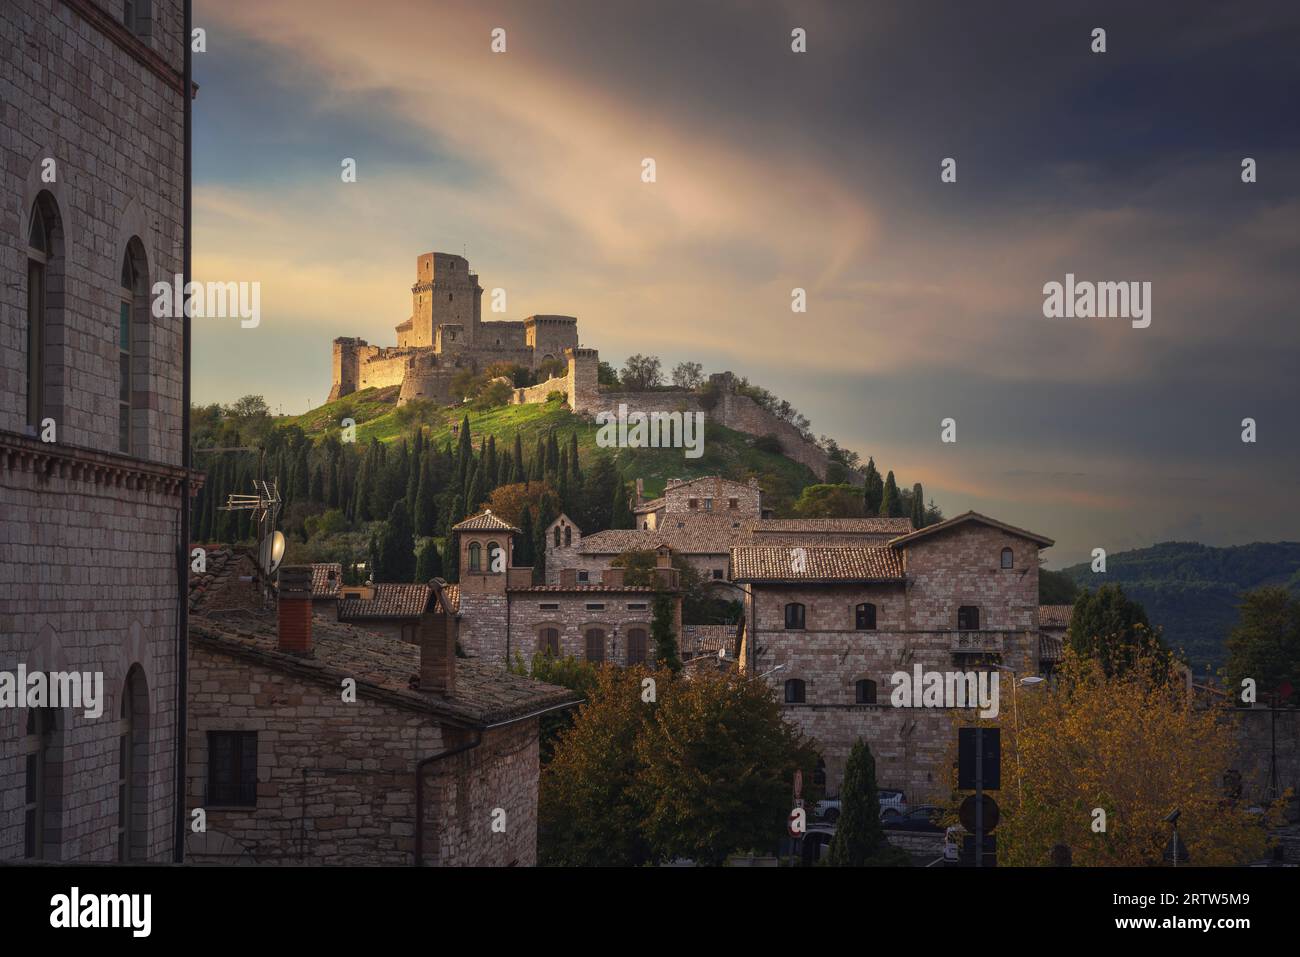 Rocca Maggiore fortress at sunset. Assisi, province of Perugia, Umbria region, Italy. Stock Photo